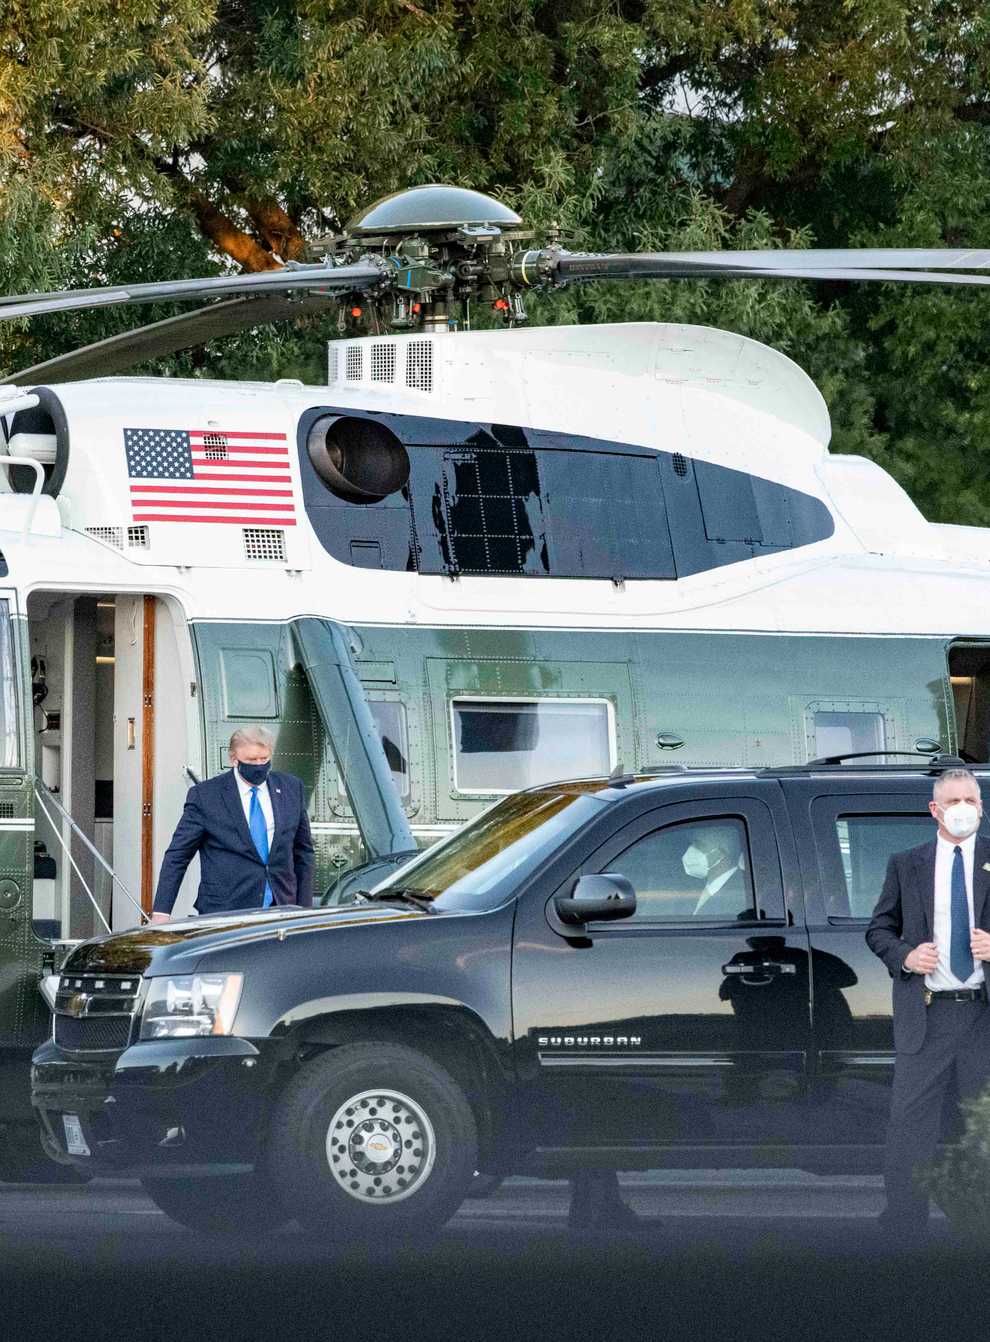 President Donald Trump arrives at Walter Reed Medical Center on Marine One for treatment after testing positive for Covid-19